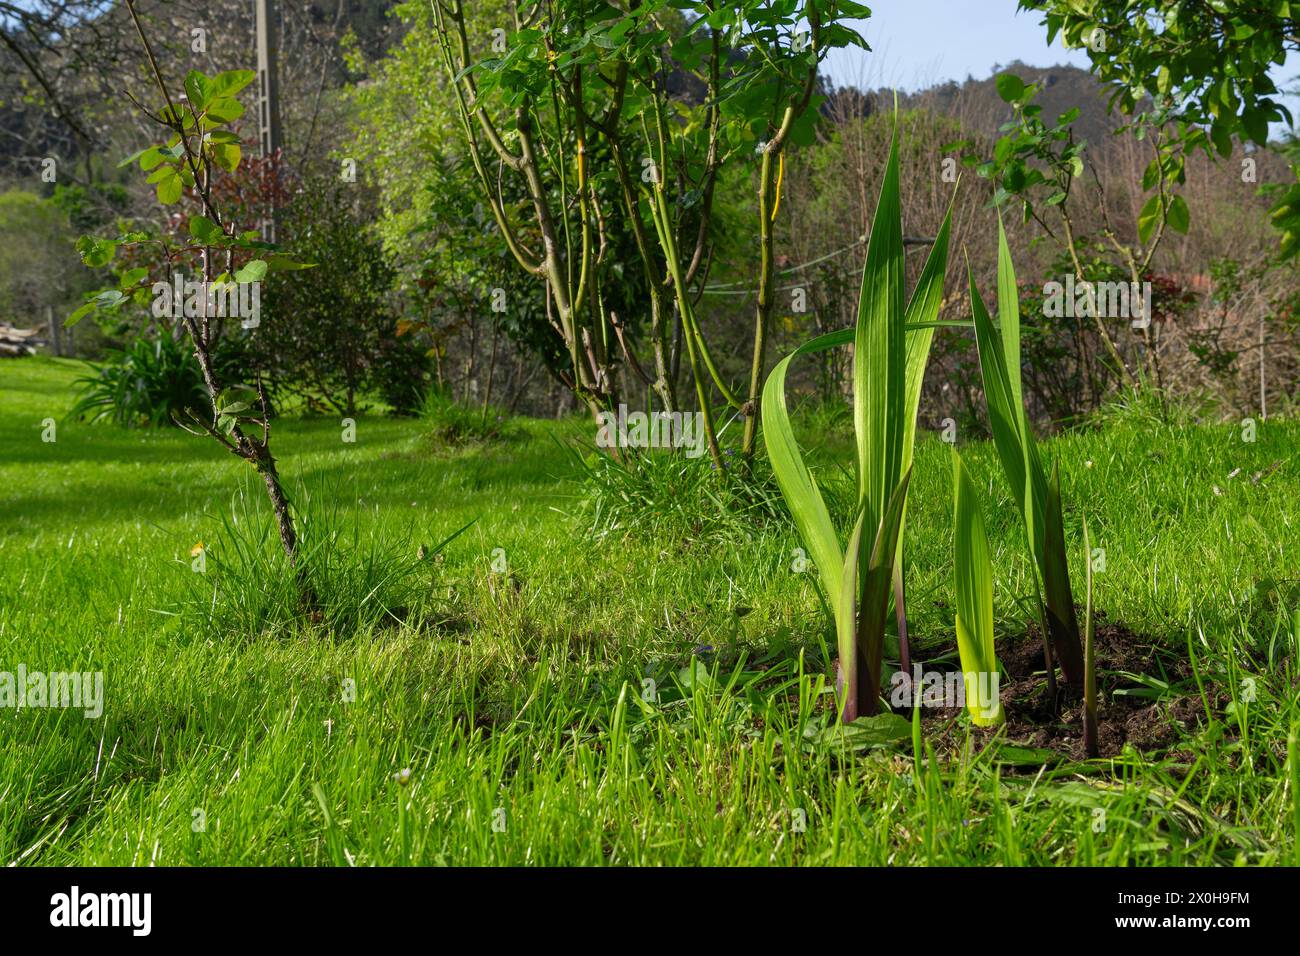 A garden with gladioli that emerge in spring Stock Photo